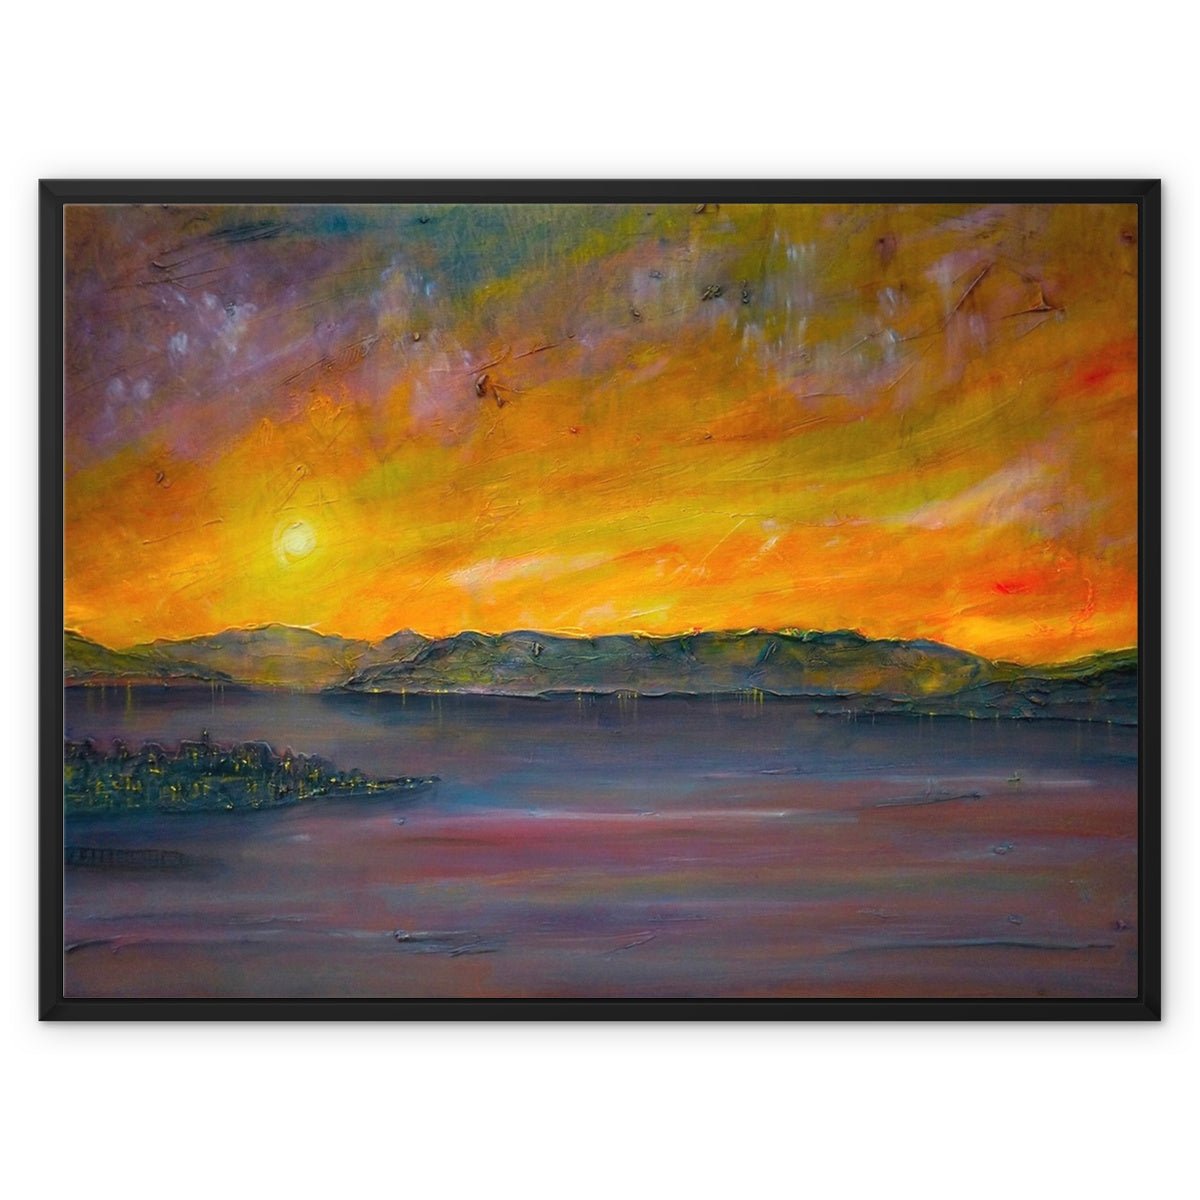 Sunset Over Gourock Painting | Framed Canvas From Scotland-Floating Framed Canvas Prints-River Clyde Art Gallery-32"x24"-Black Frame-Paintings, Prints, Homeware, Art Gifts From Scotland By Scottish Artist Kevin Hunter